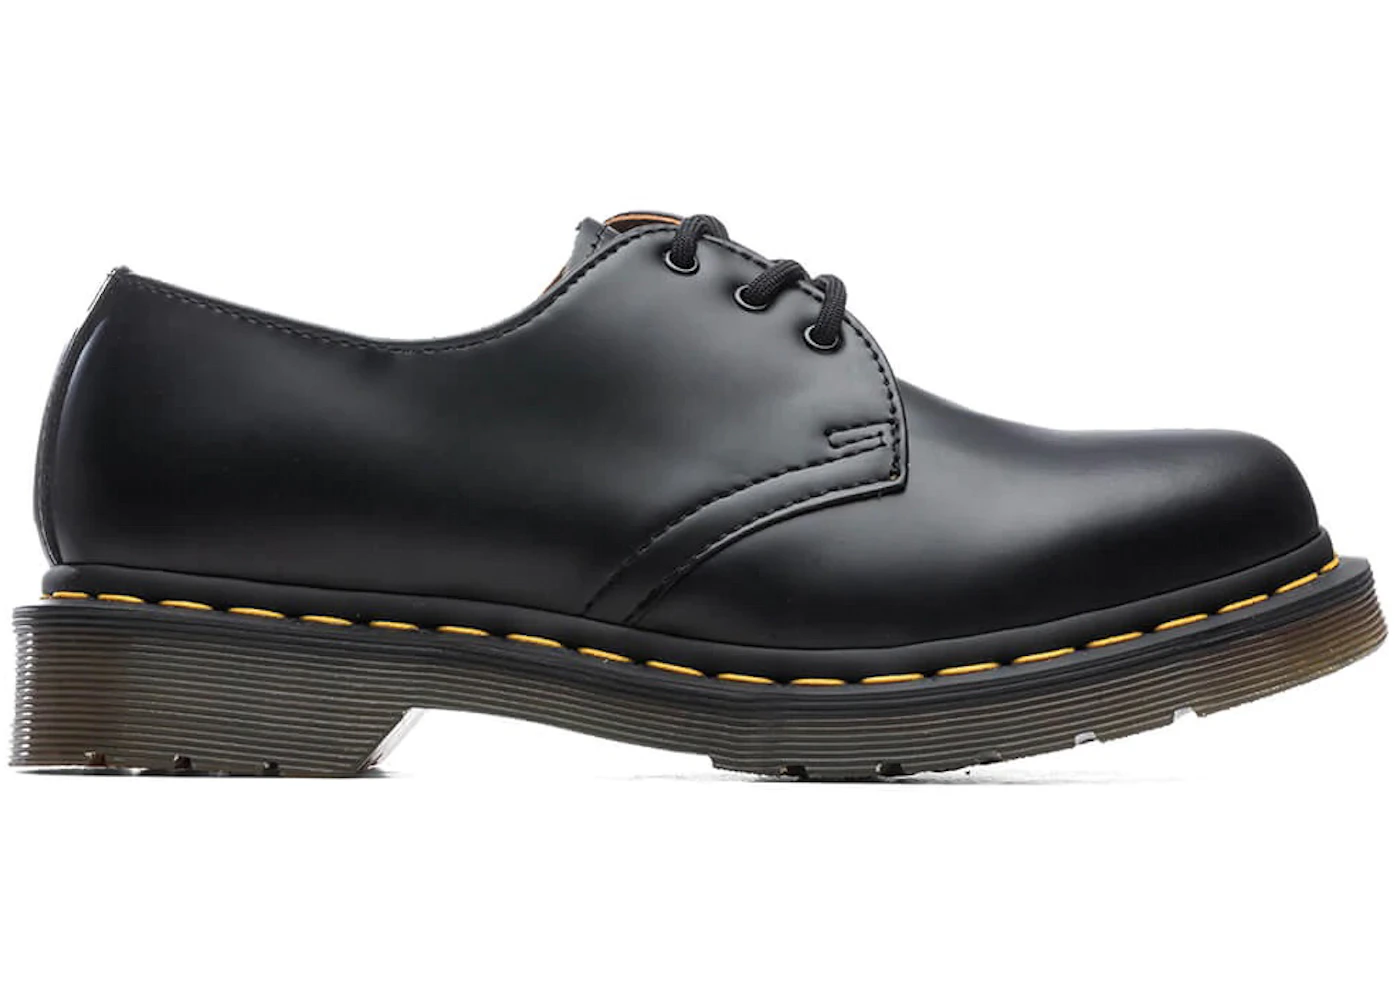 Dr. Martens 1461 Smooth Leather Oxford Black (Women'S) - 11837002 - Us